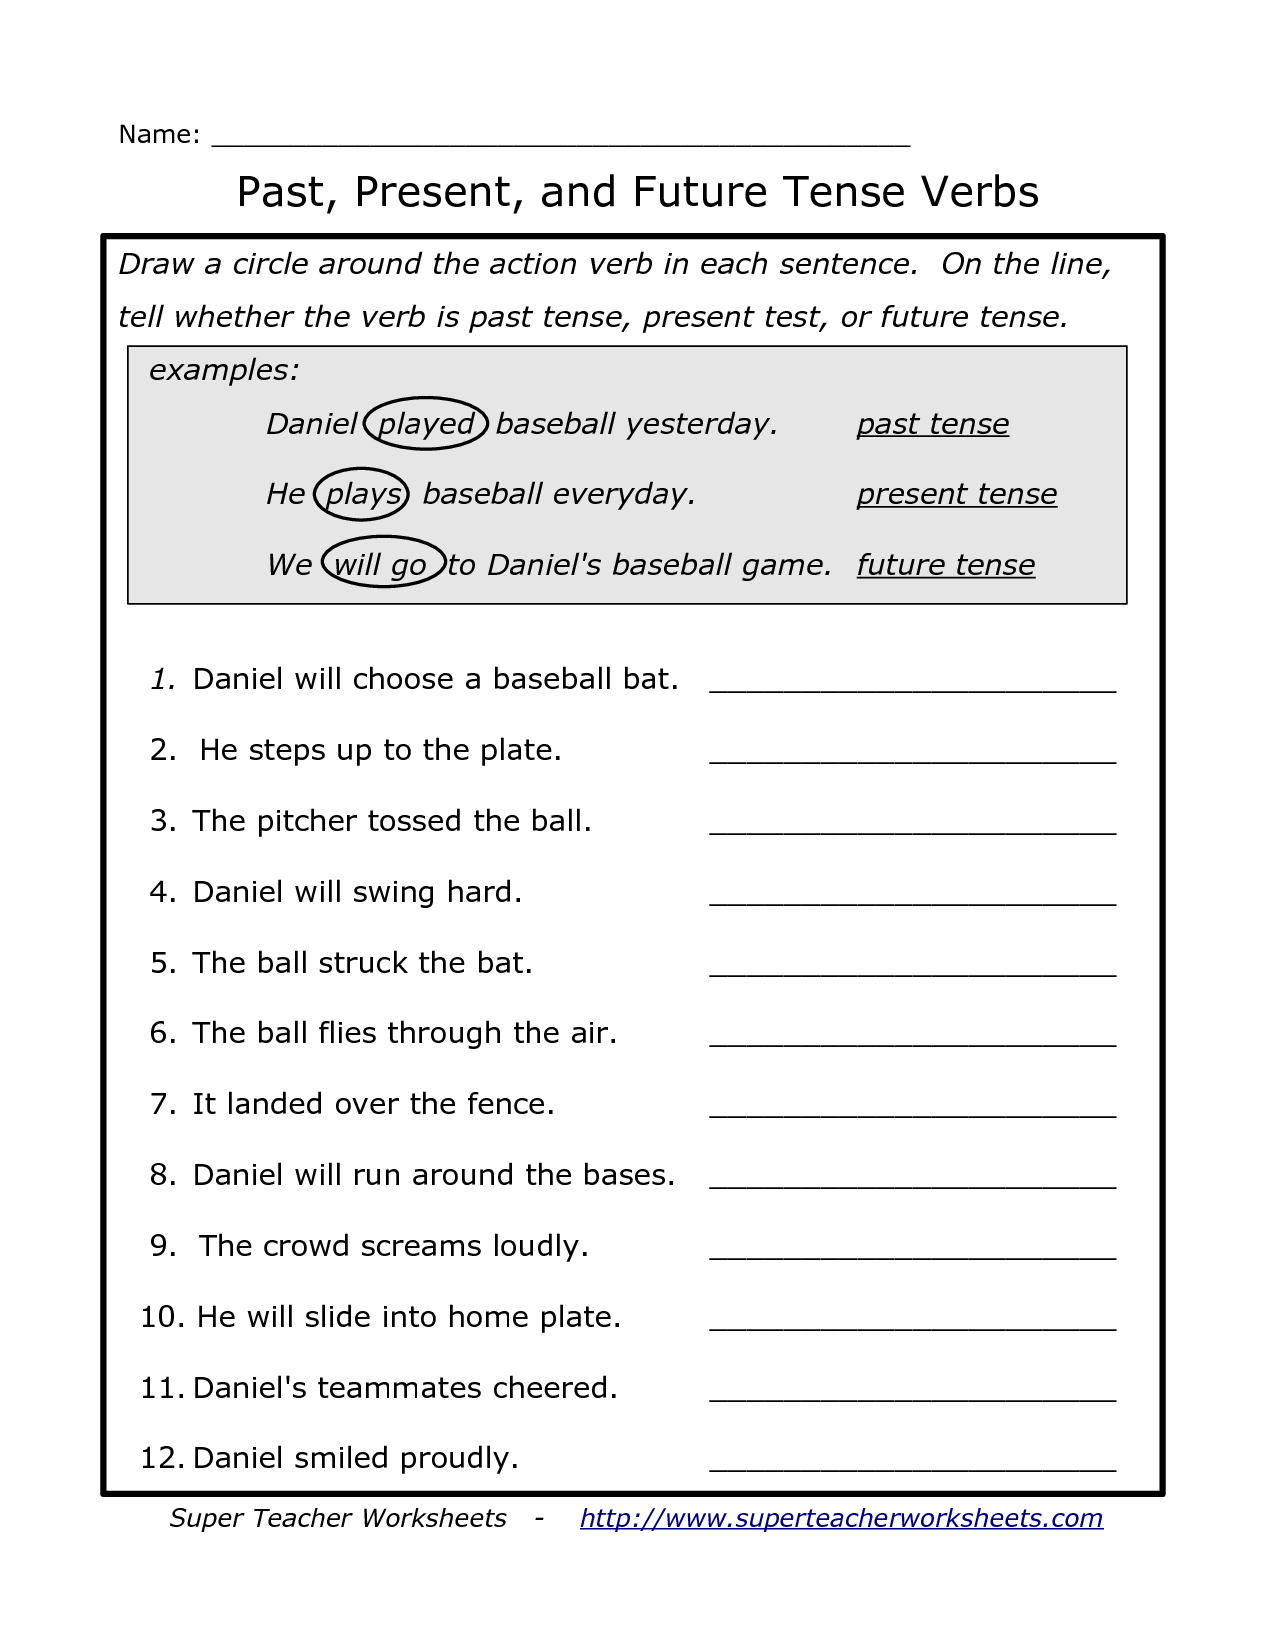 Past Present And Future Tense Verbs | Worksheets | Pinterest - Free Printable Past Tense Verbs Worksheets